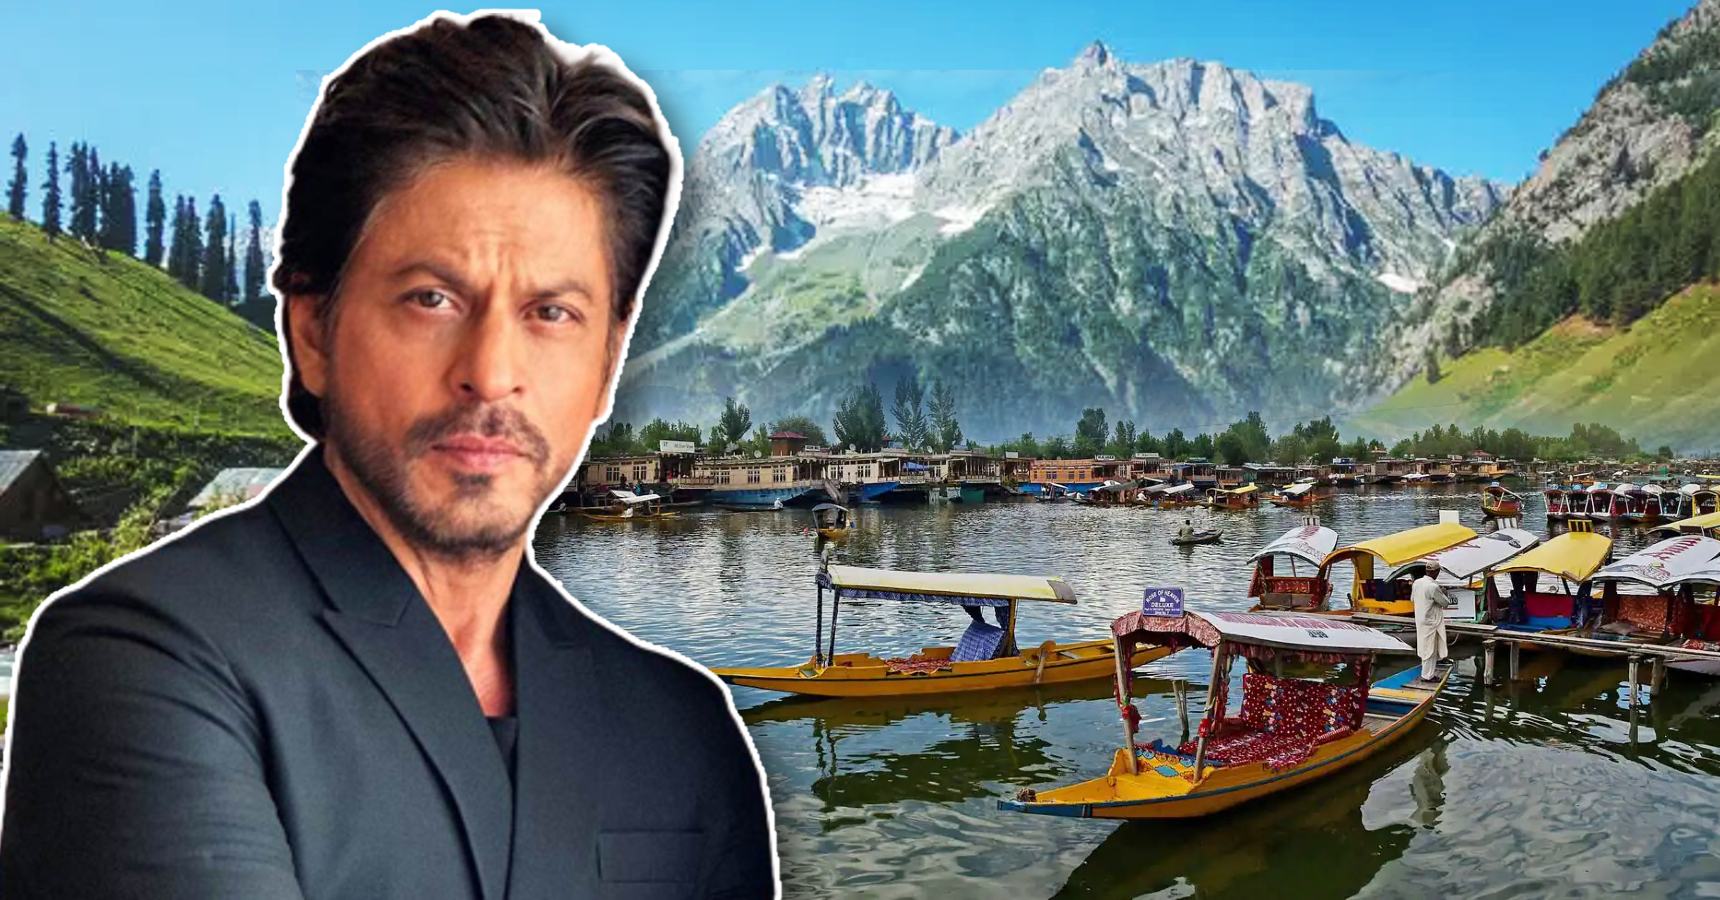 Why Shah Rukh Khan never visited Kashmir and never wanted to go